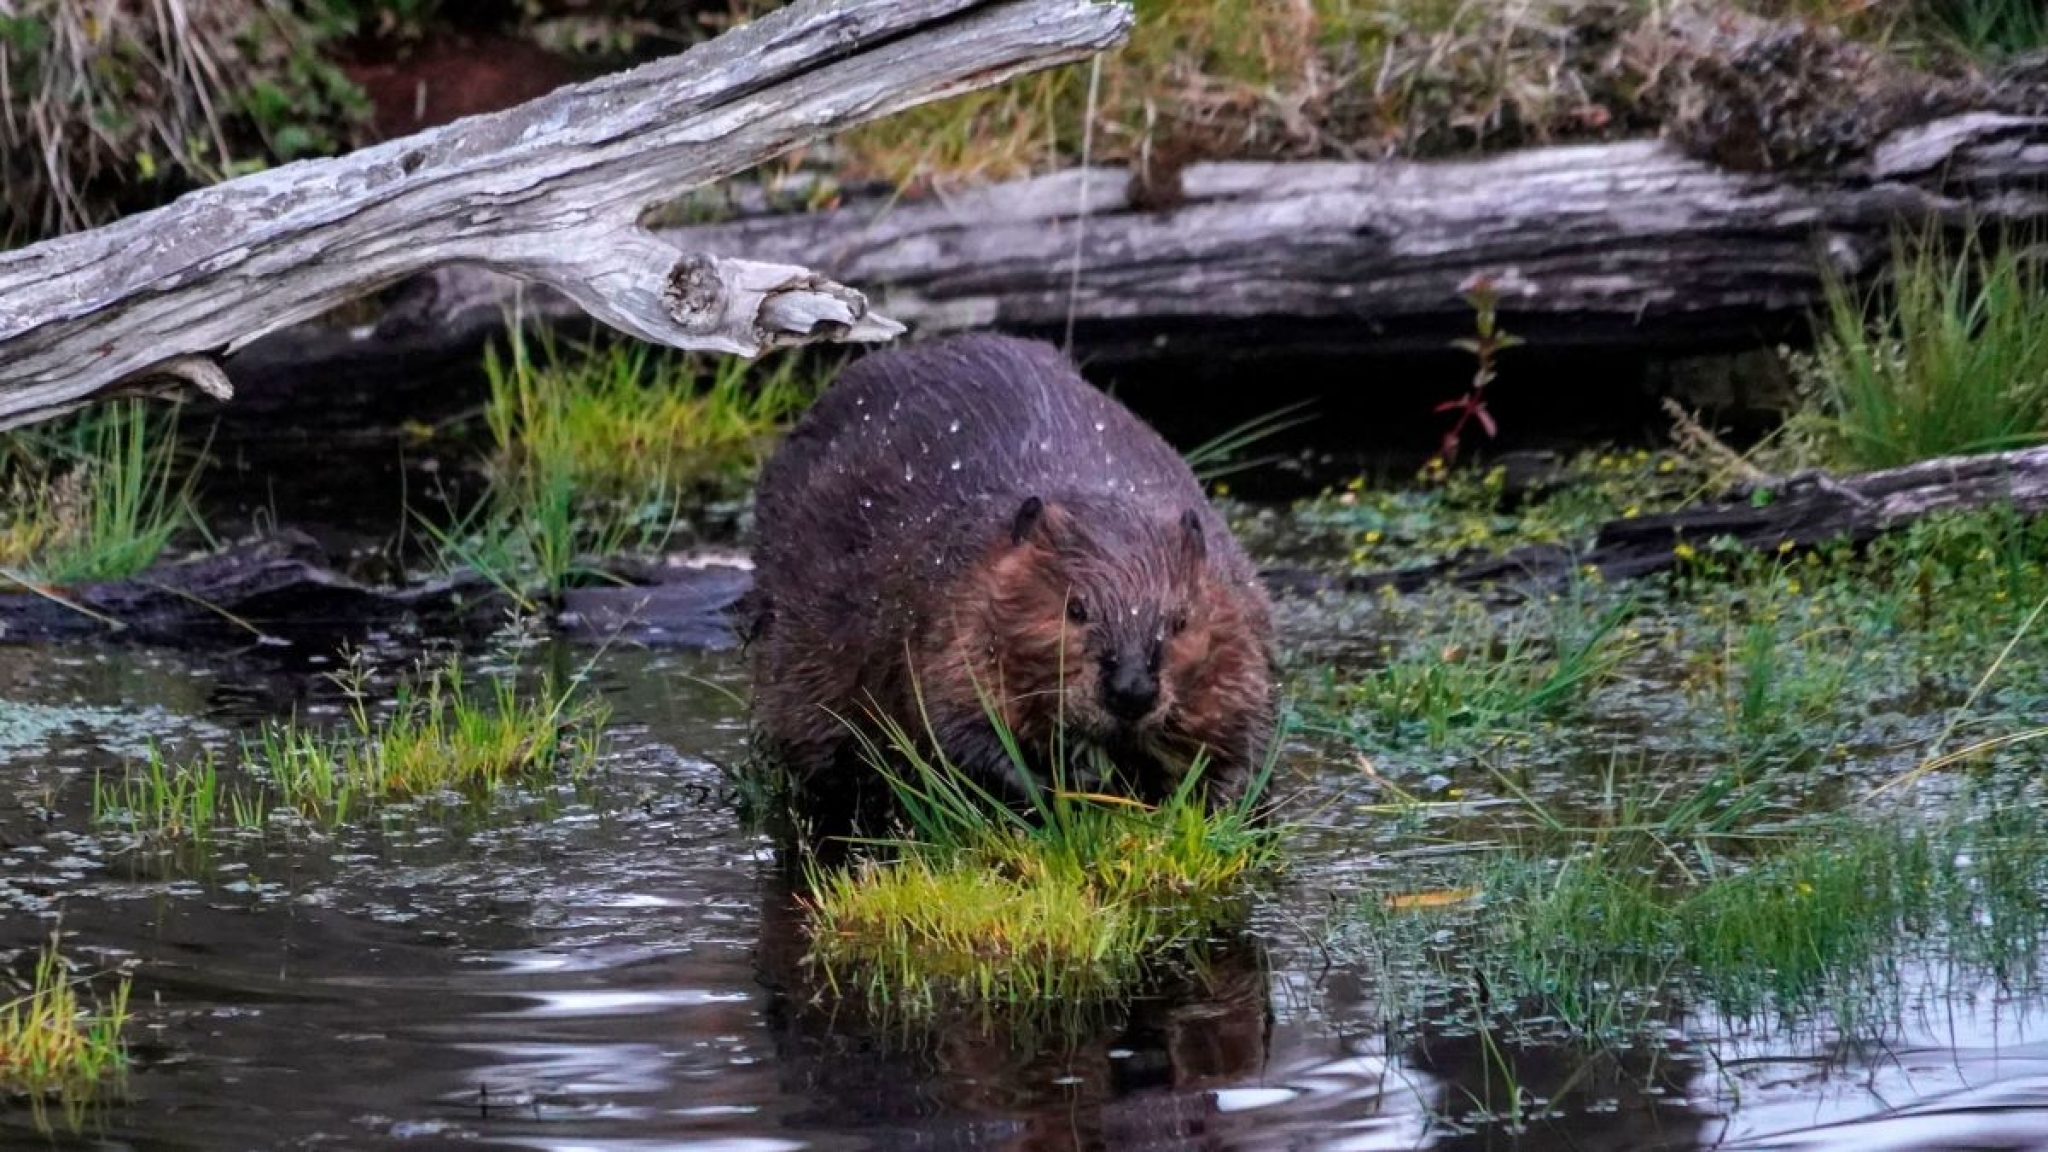 Internet Outage in Canada Blamed on Beavers Gnawing Through Fiber Cables